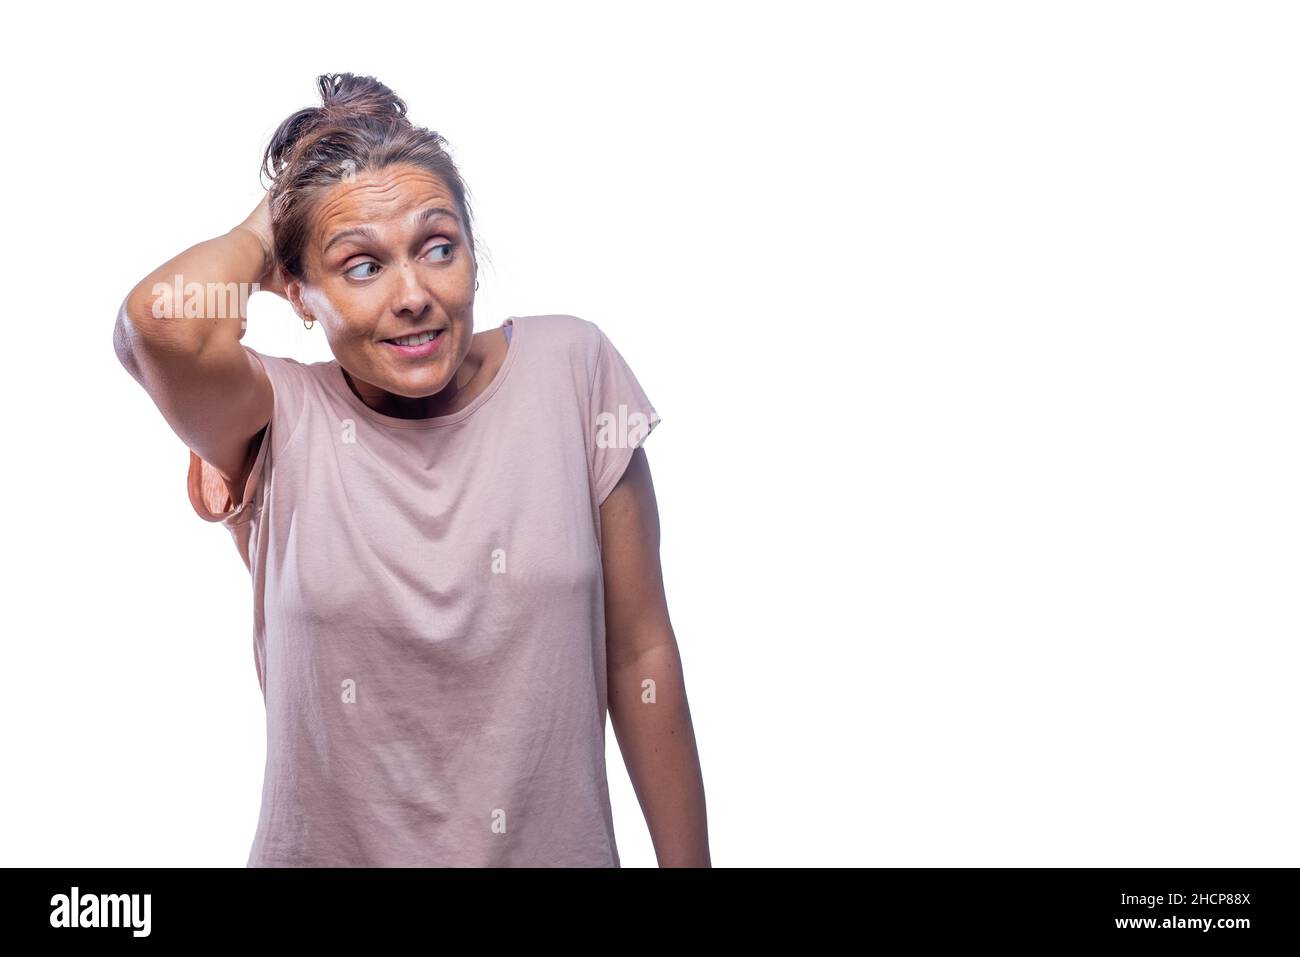 embarrassed woman looking to a side on a white background Stock Photo